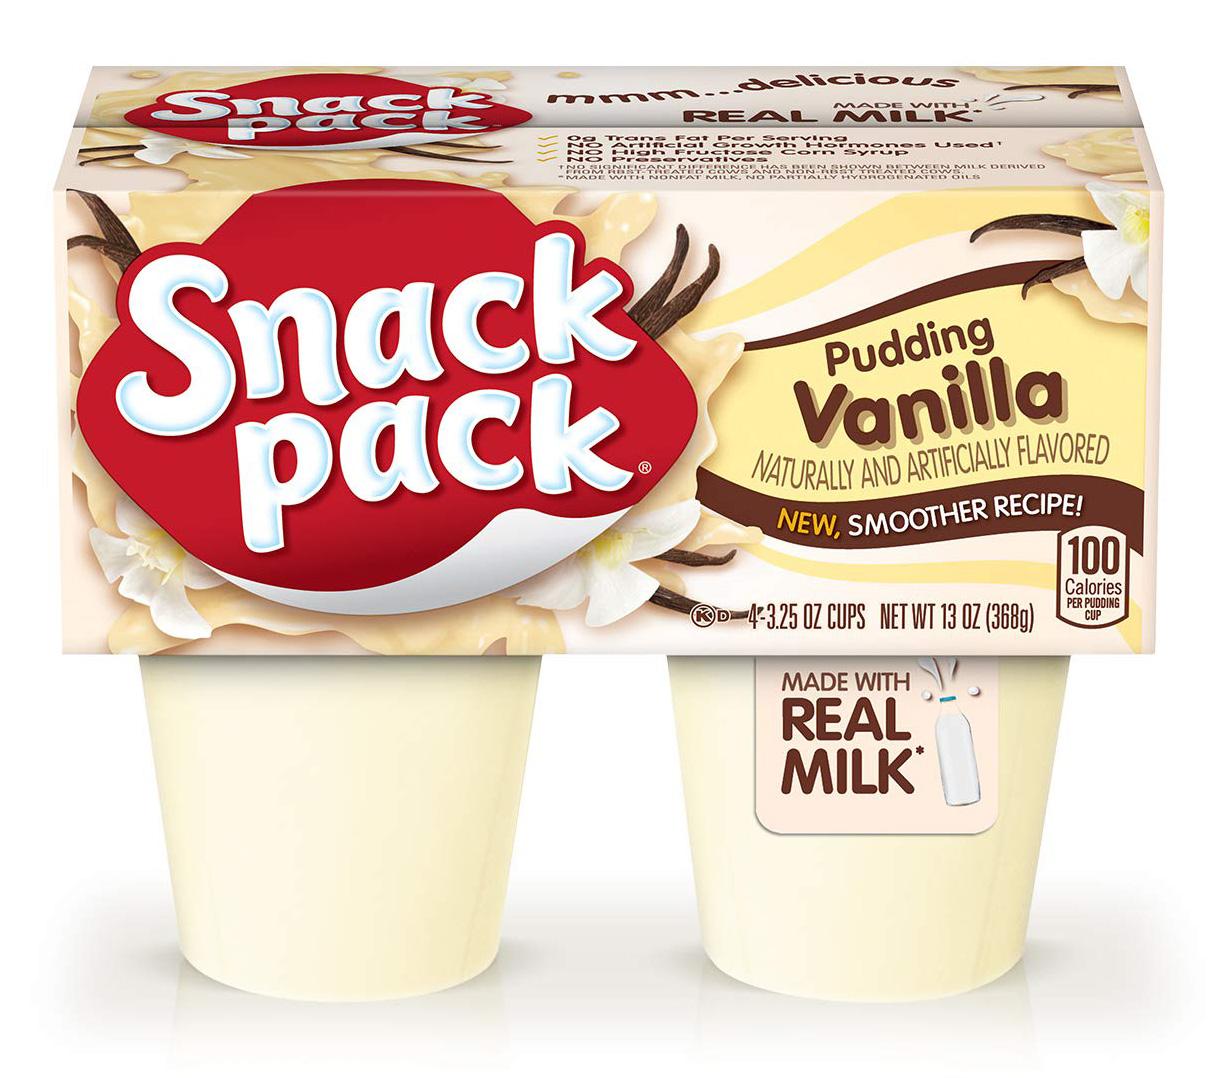 48 Snack Pack Vanilla Pudding Cups for $7.90 Shipped